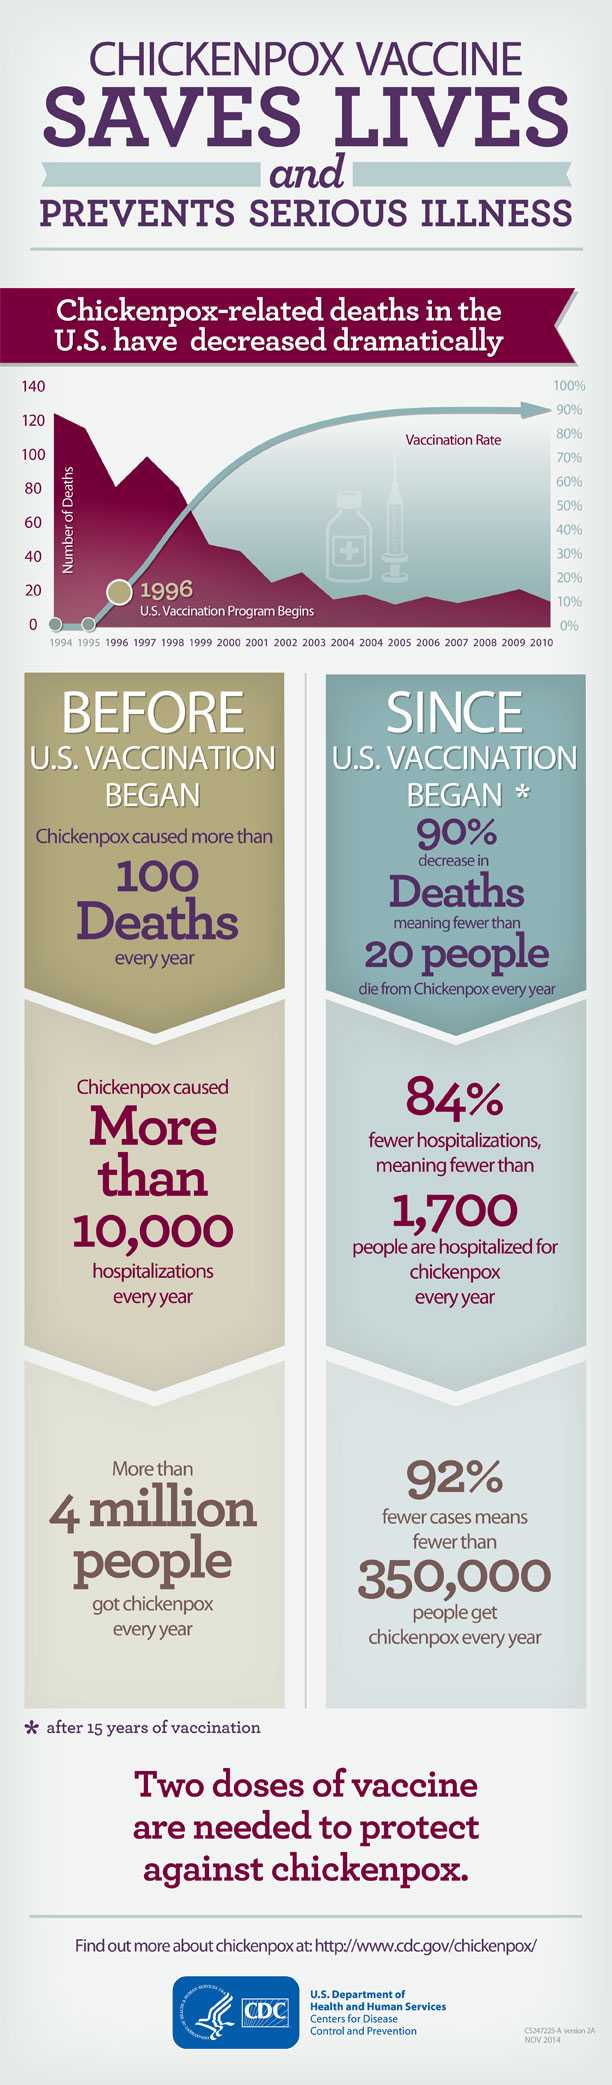 see text equivalent for Chickenpox Vaccine Infographic: Chickenpox Vaccine Saves Lives and Prevents Serious Illness Infographic